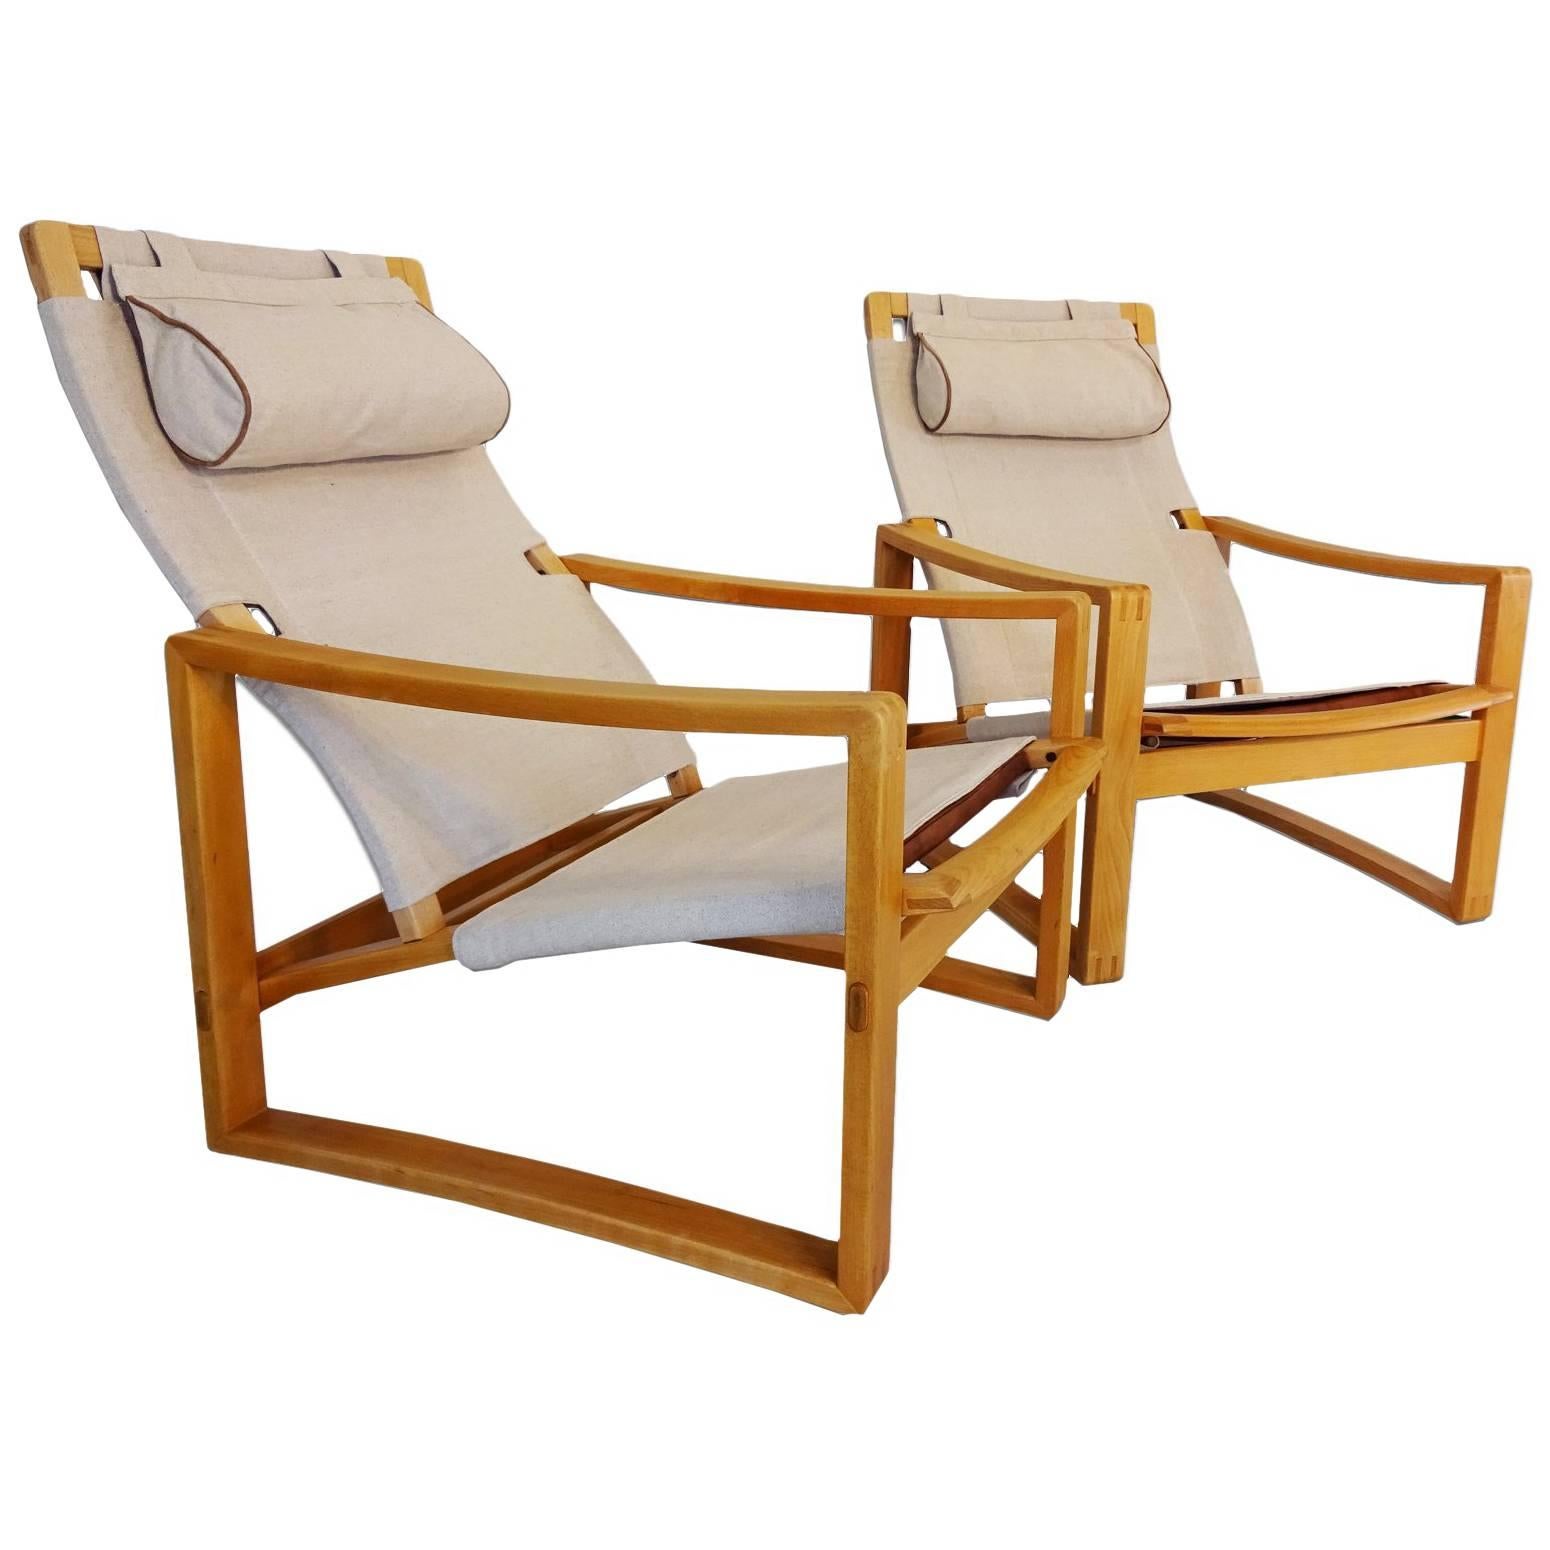 Very Rare Pair of Mid-Century Børge Jensen & Sønner ‘Safari’ Lounge Chairs For Sale